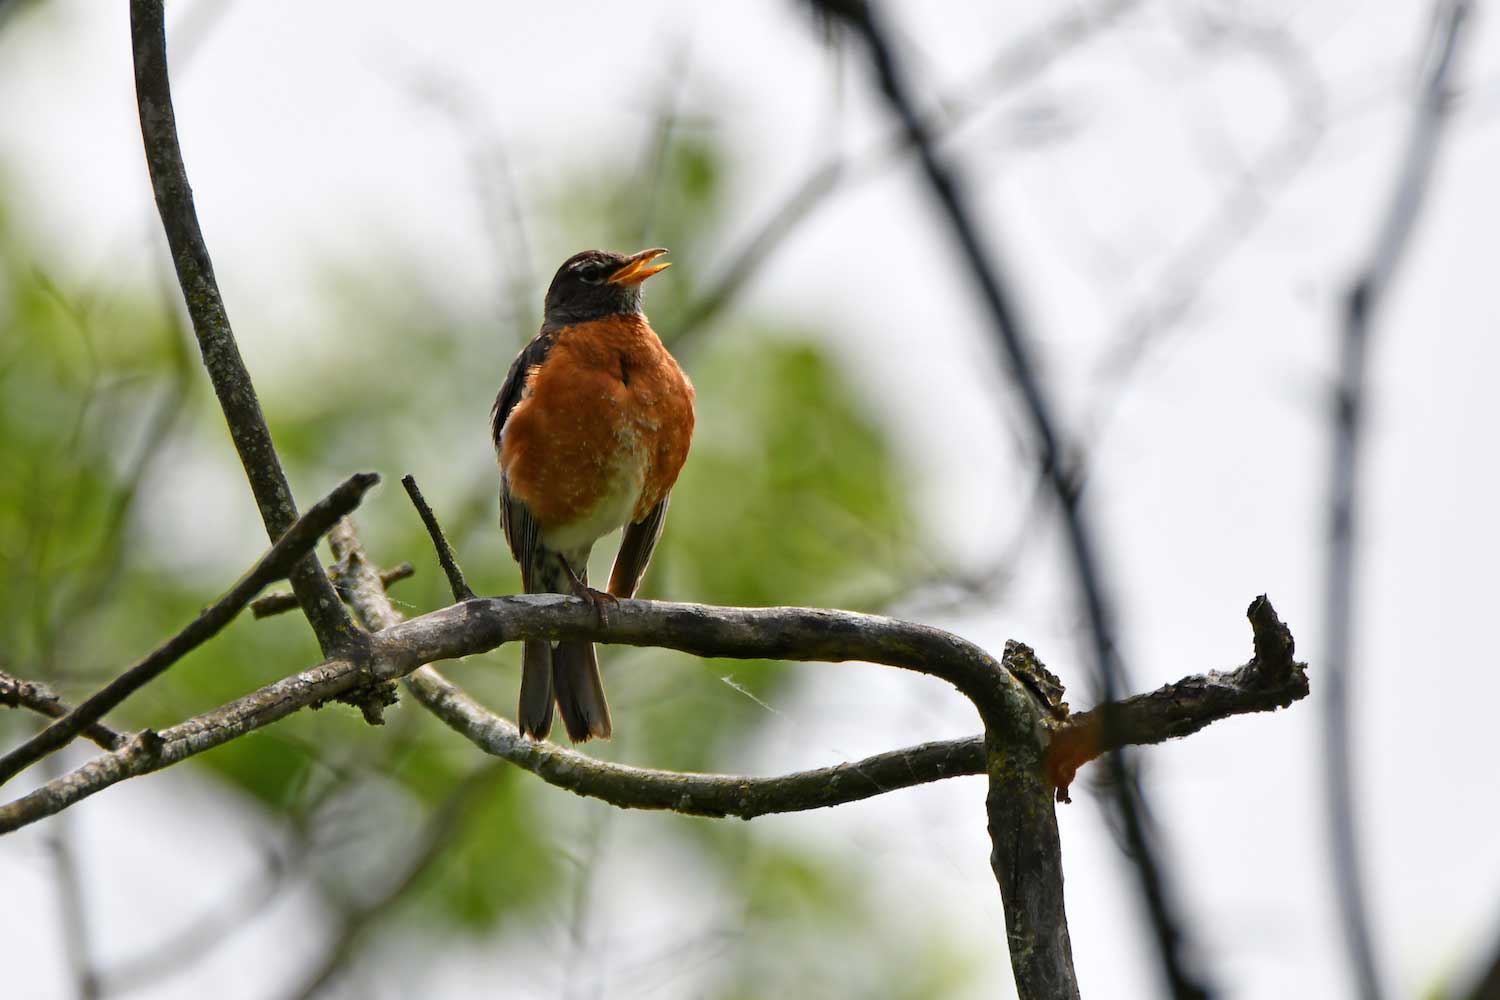 A robin chirping from a branch.